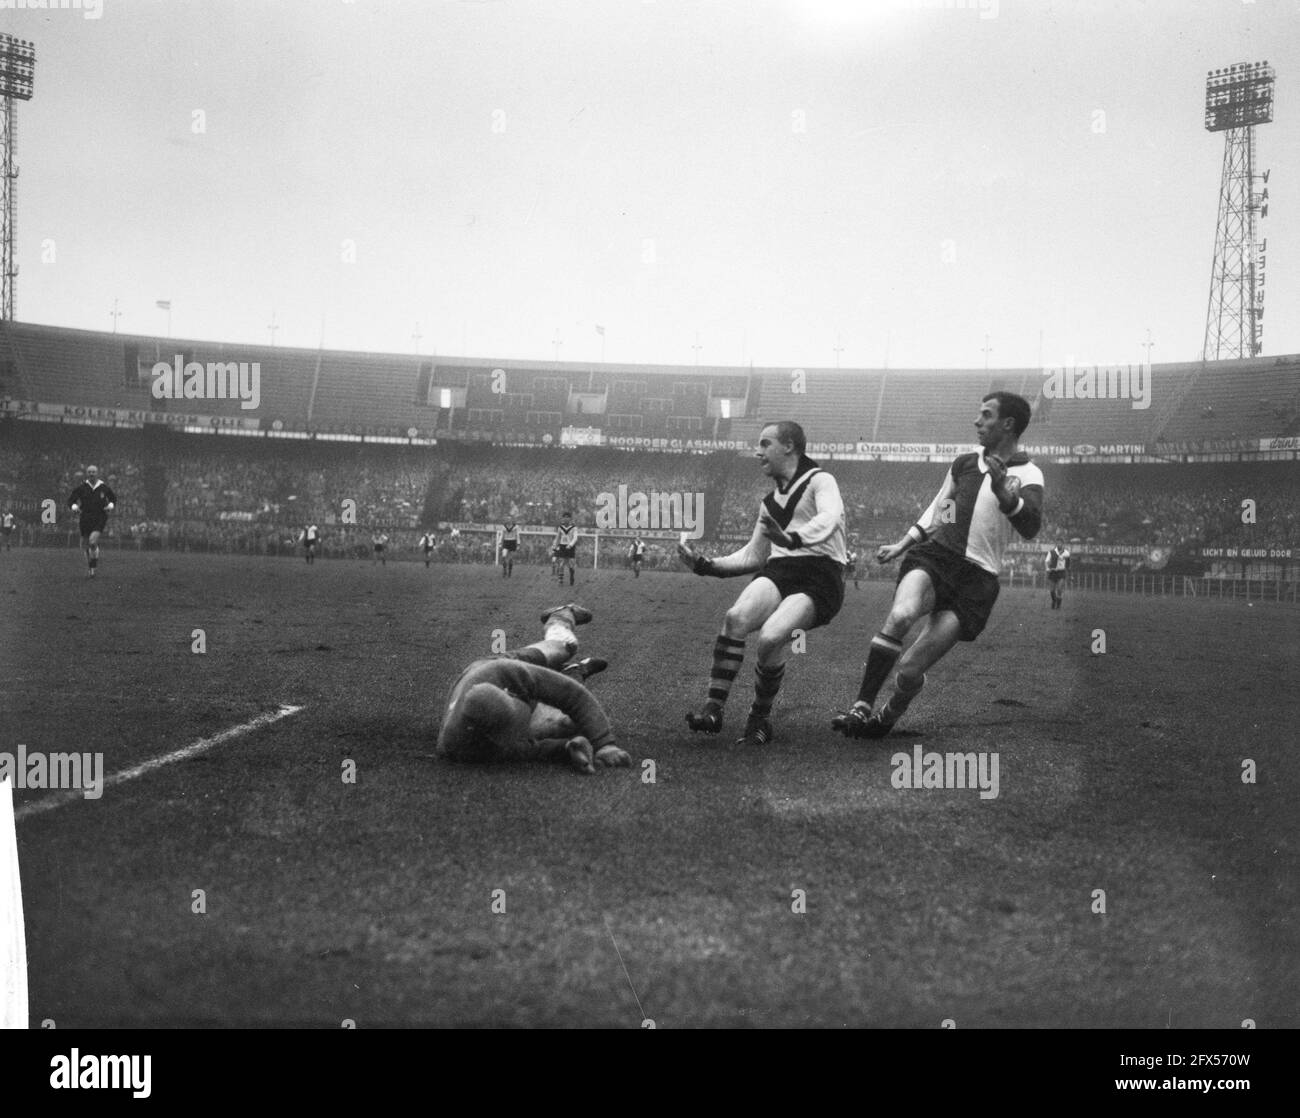 Feyenoord versus VVV. Coen Moulijn in action, December 10, 1961, sports, soccer, The Netherlands, 20th century press agency photo, news to remember, documentary, historic photography 1945-1990, visual stories, human history of the Twentieth Century, capturing moments in time Stock Photo